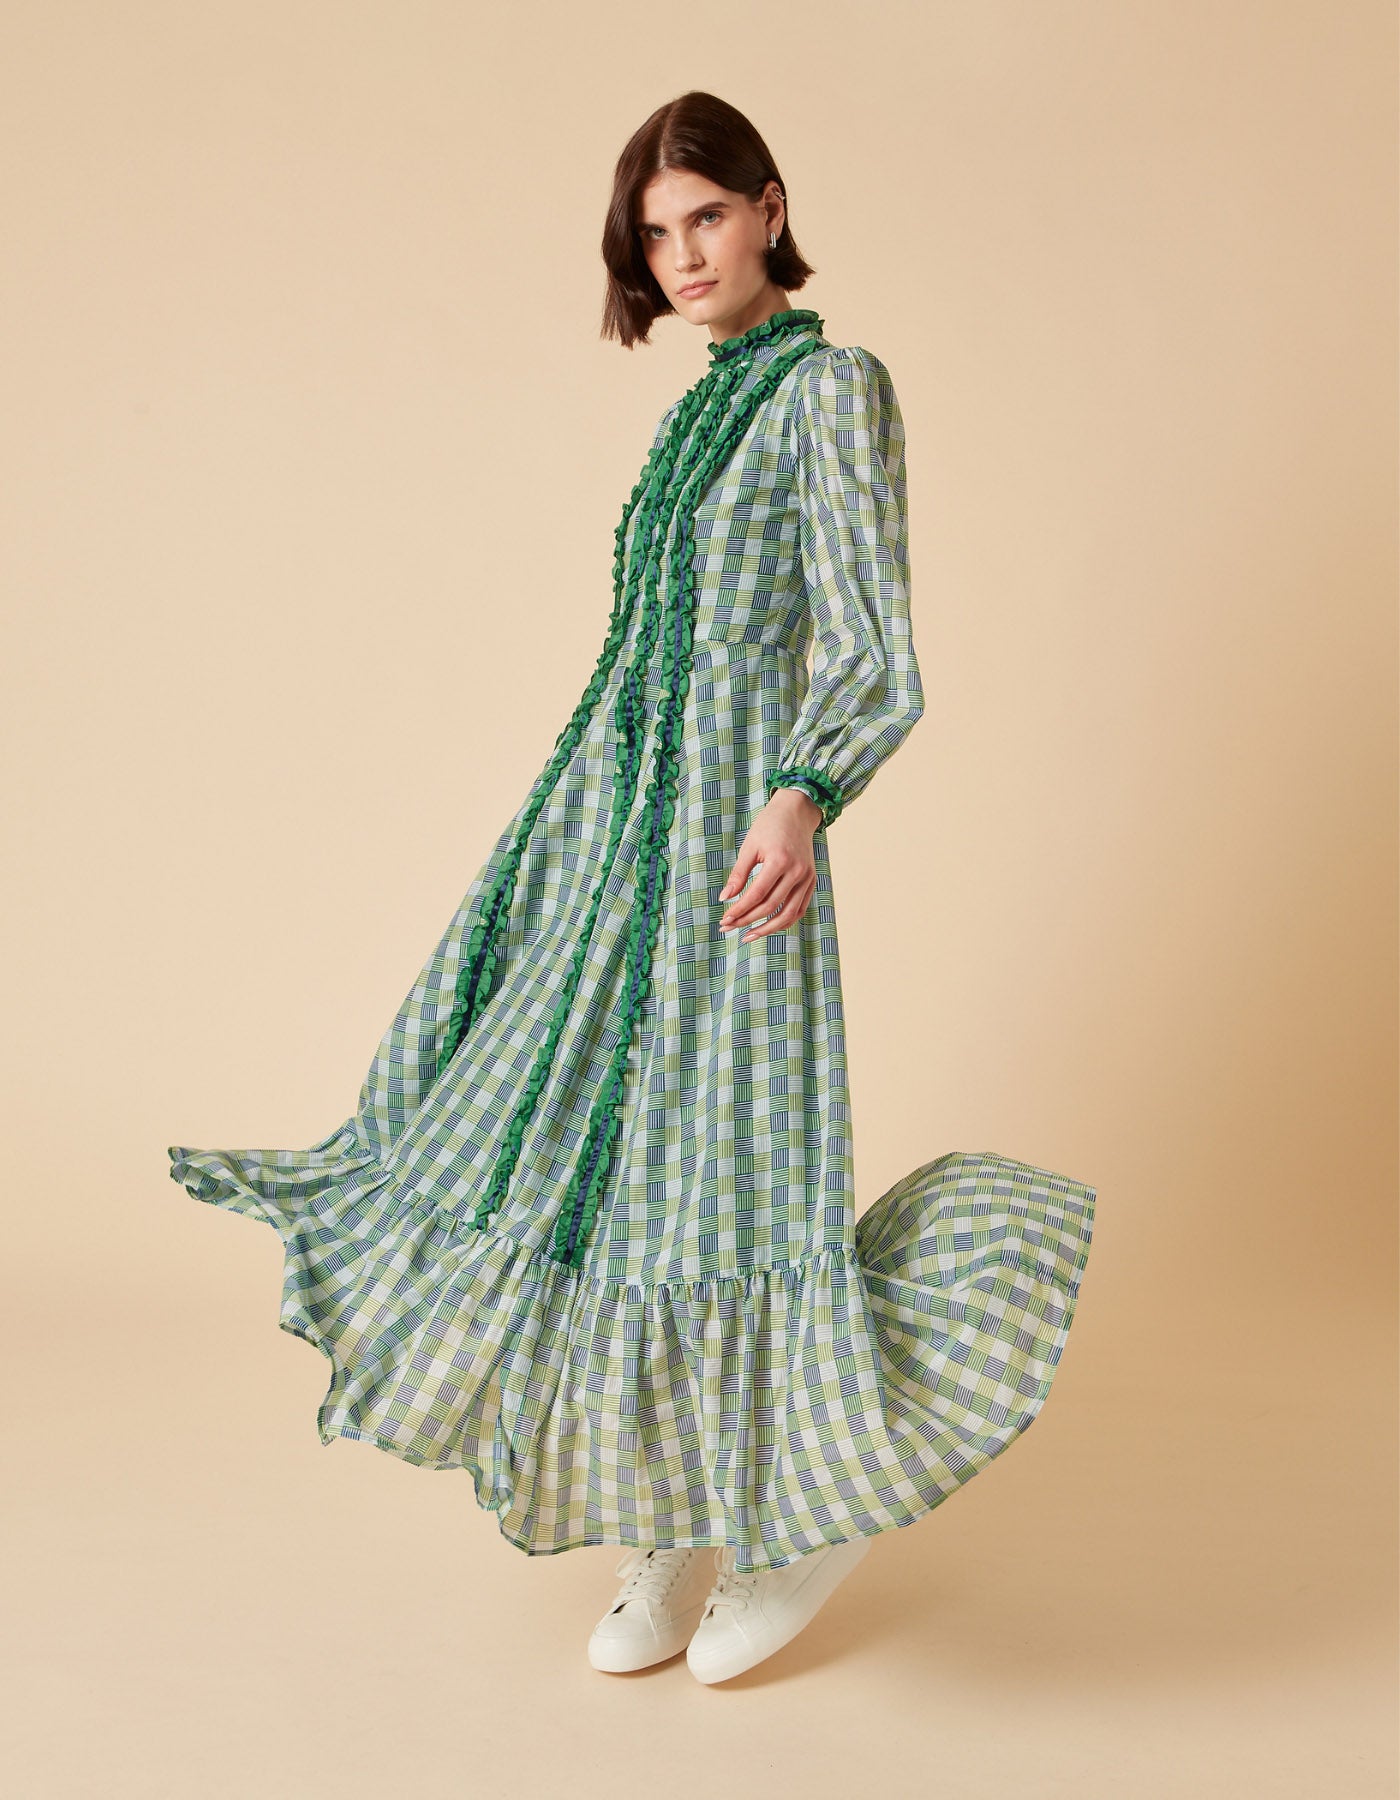 With a frill detail running through the top to bottom of dress and on the cuff, this blue green geo print covers this dress’s lustrous silk voile fabric. 